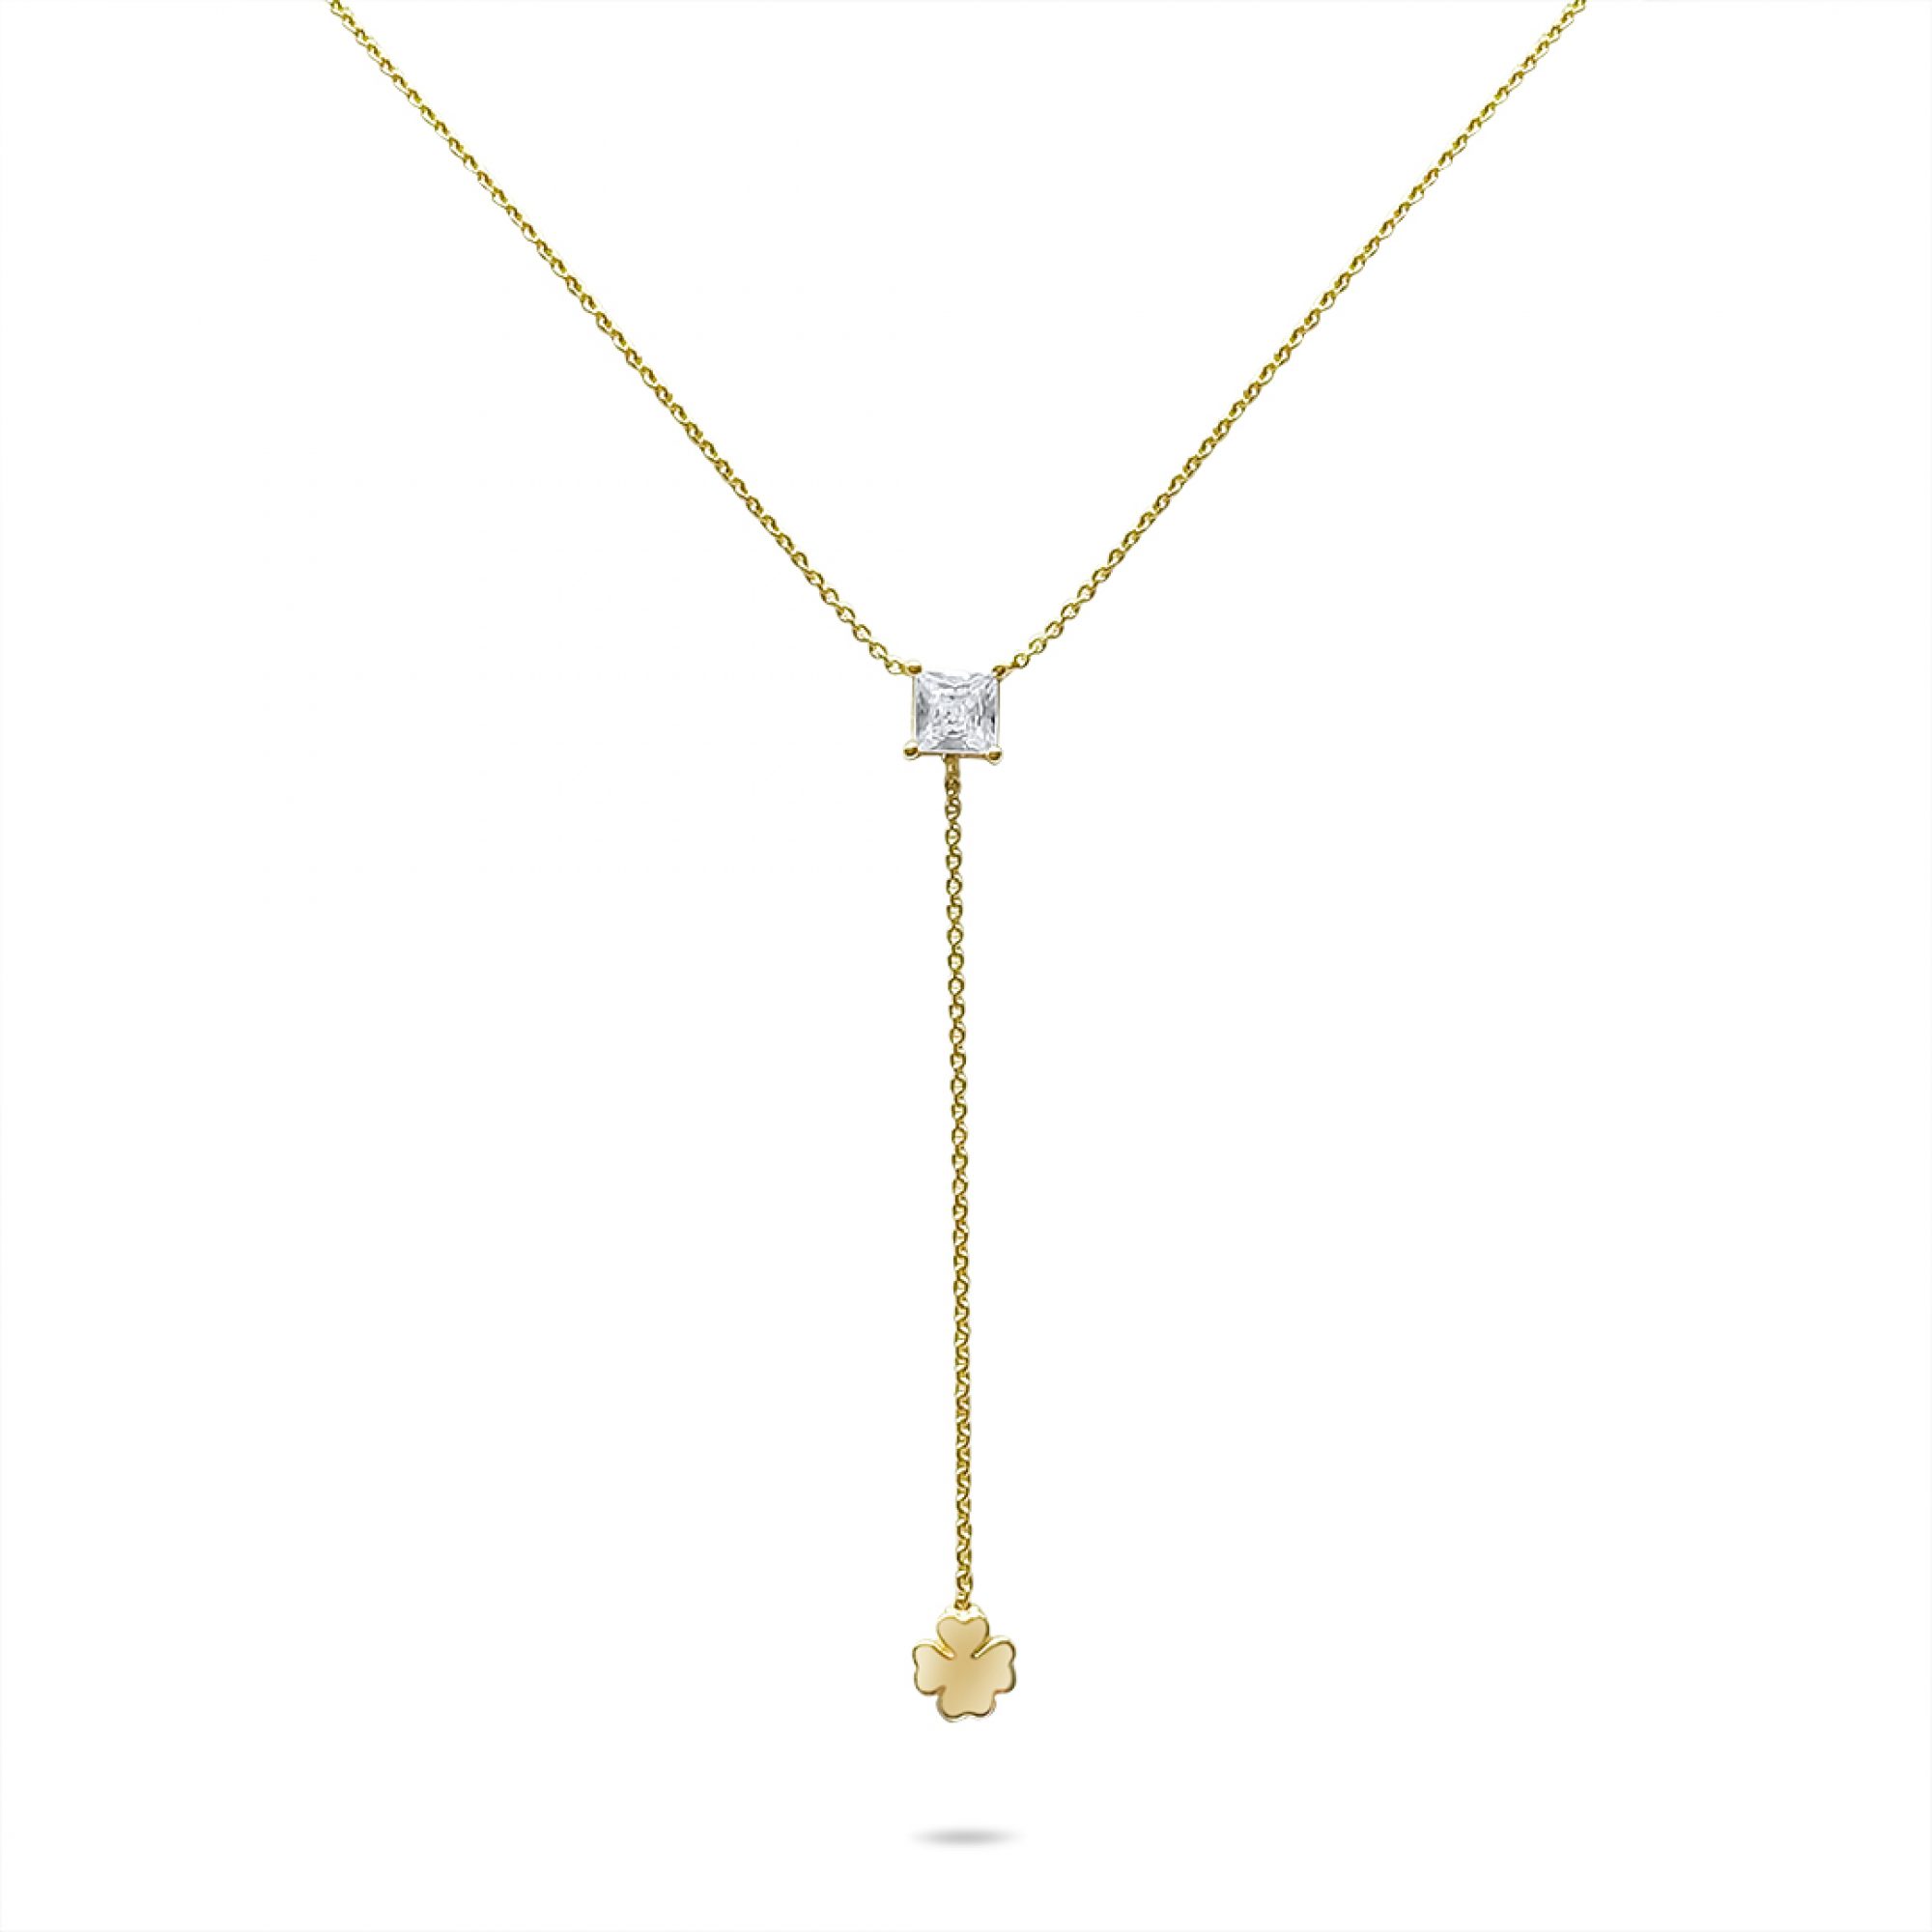 Gold plated necklace with zircon stone